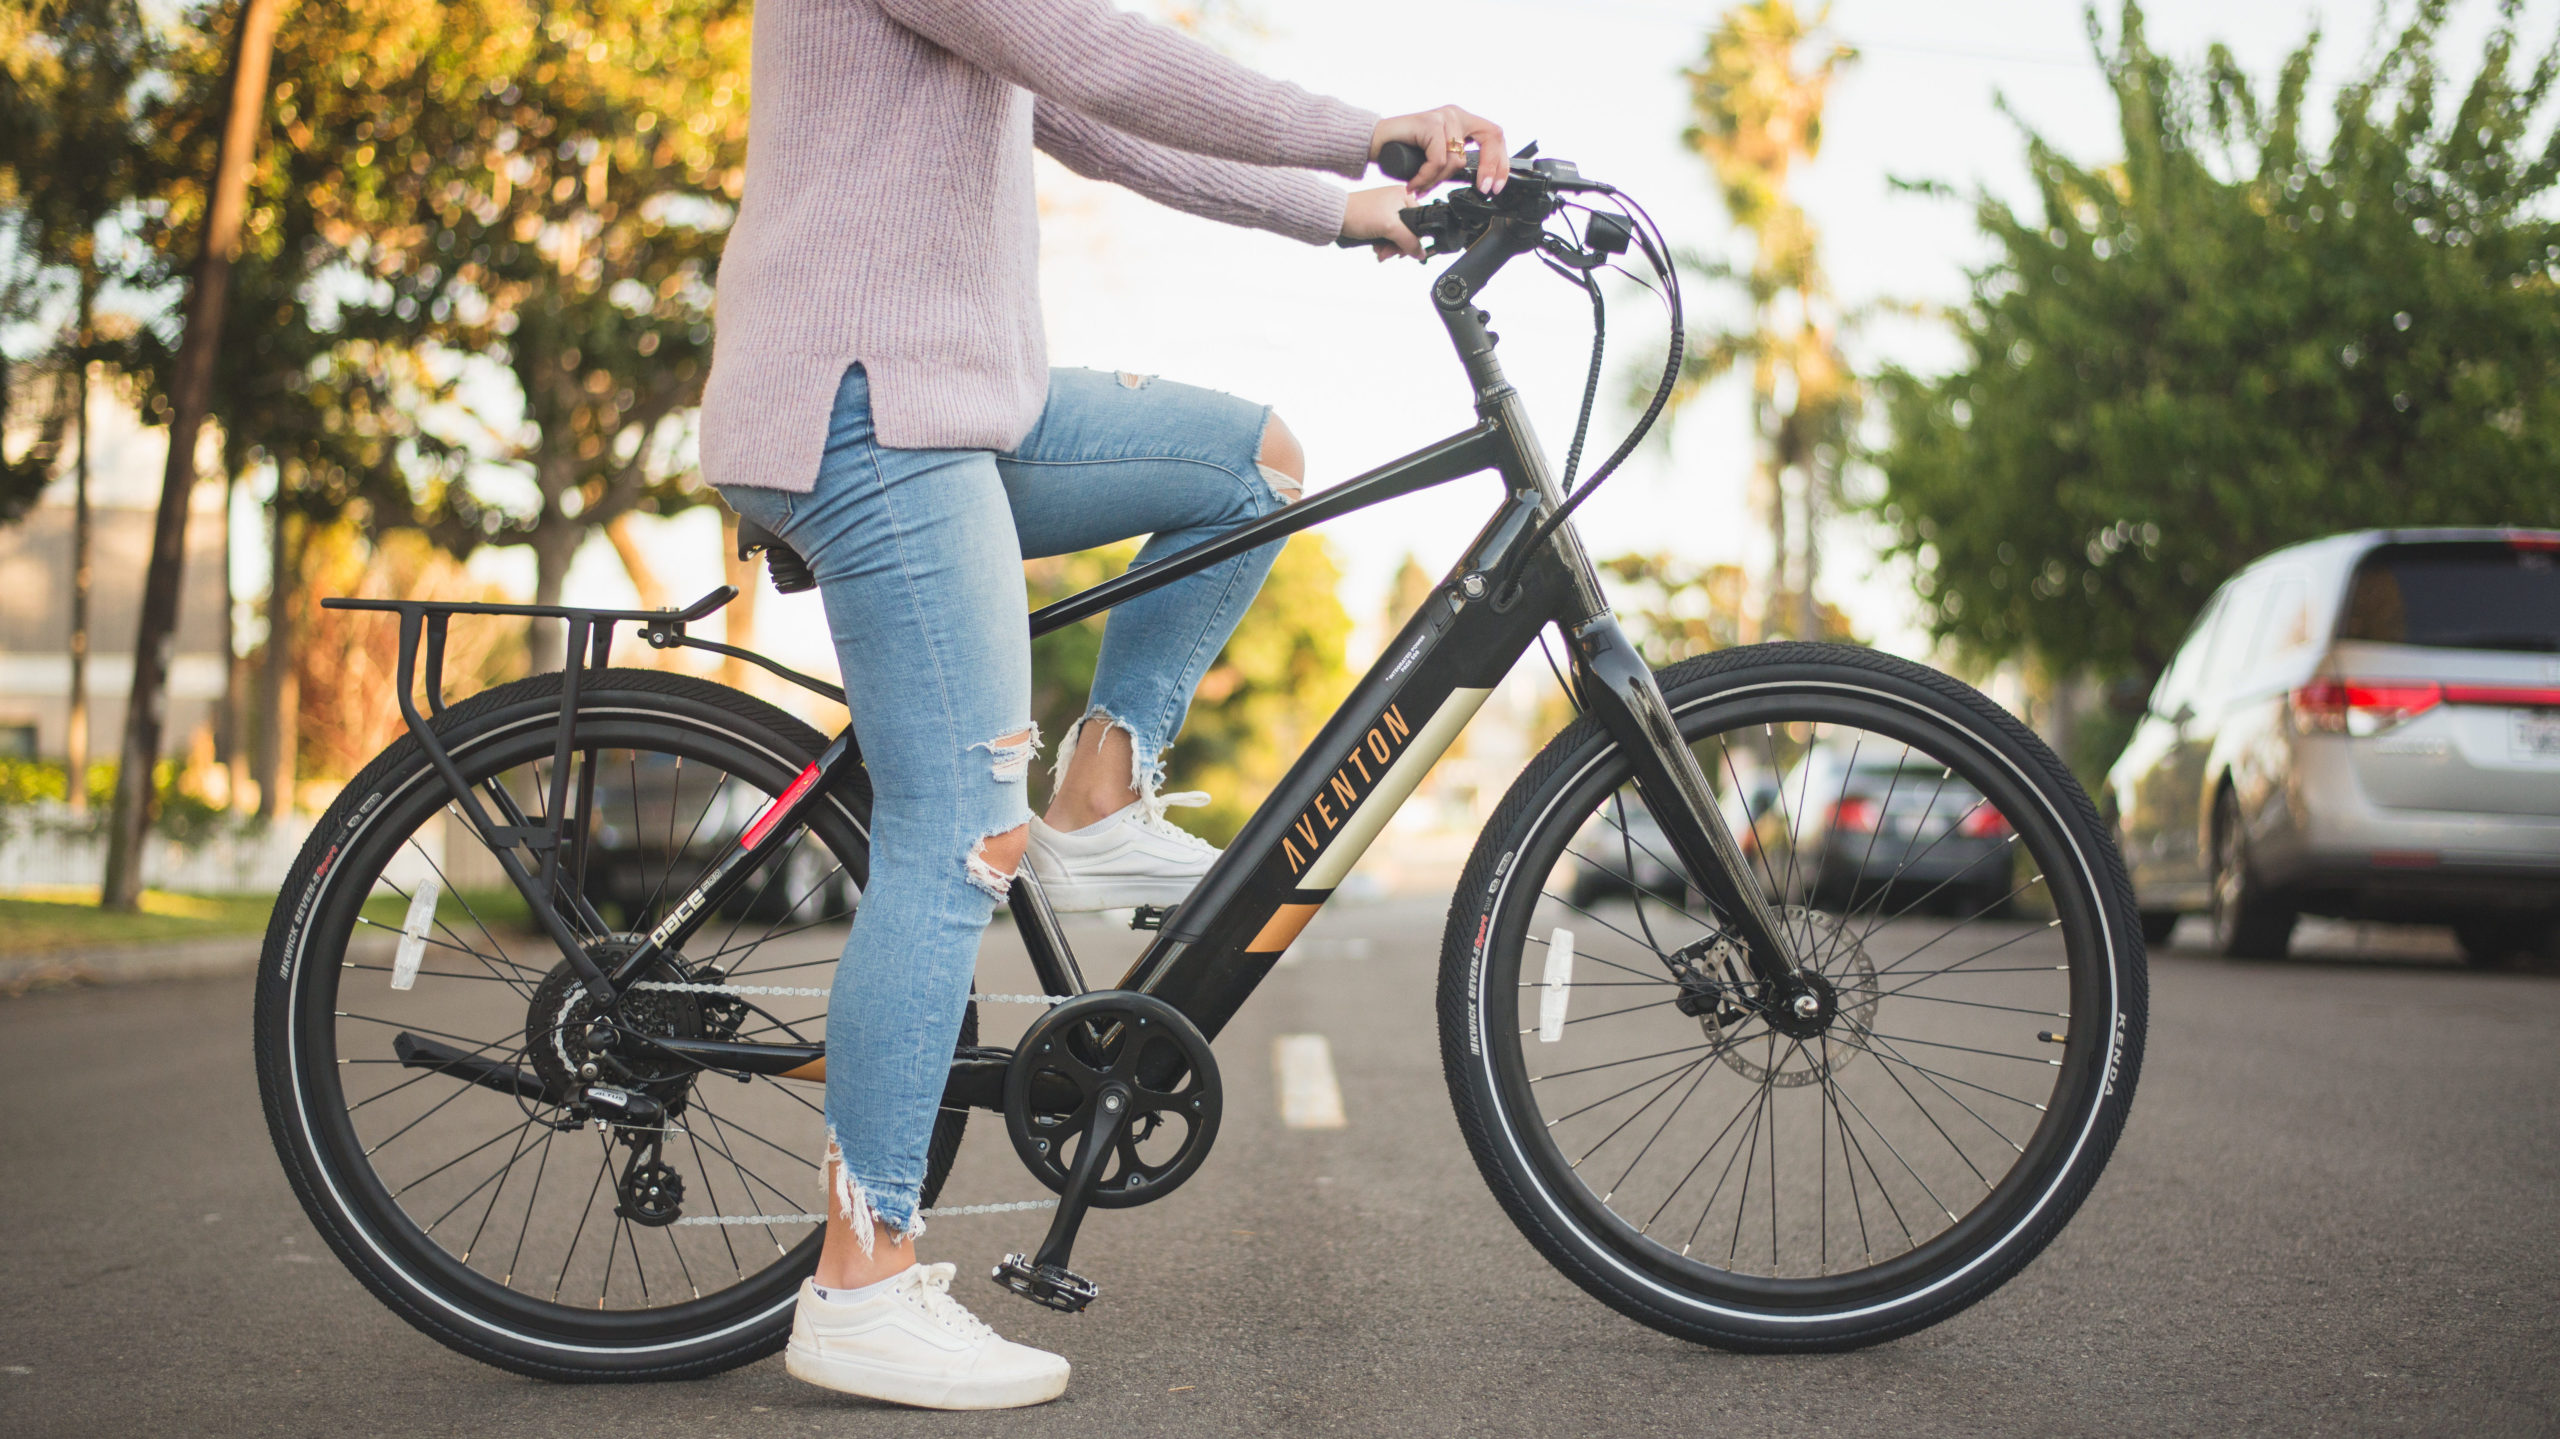 A peson wearing jeans and white sneakers sits on a Midnight Black Pace 500 ebike Next-Gen on the road. Houses and trees and car are in the background.